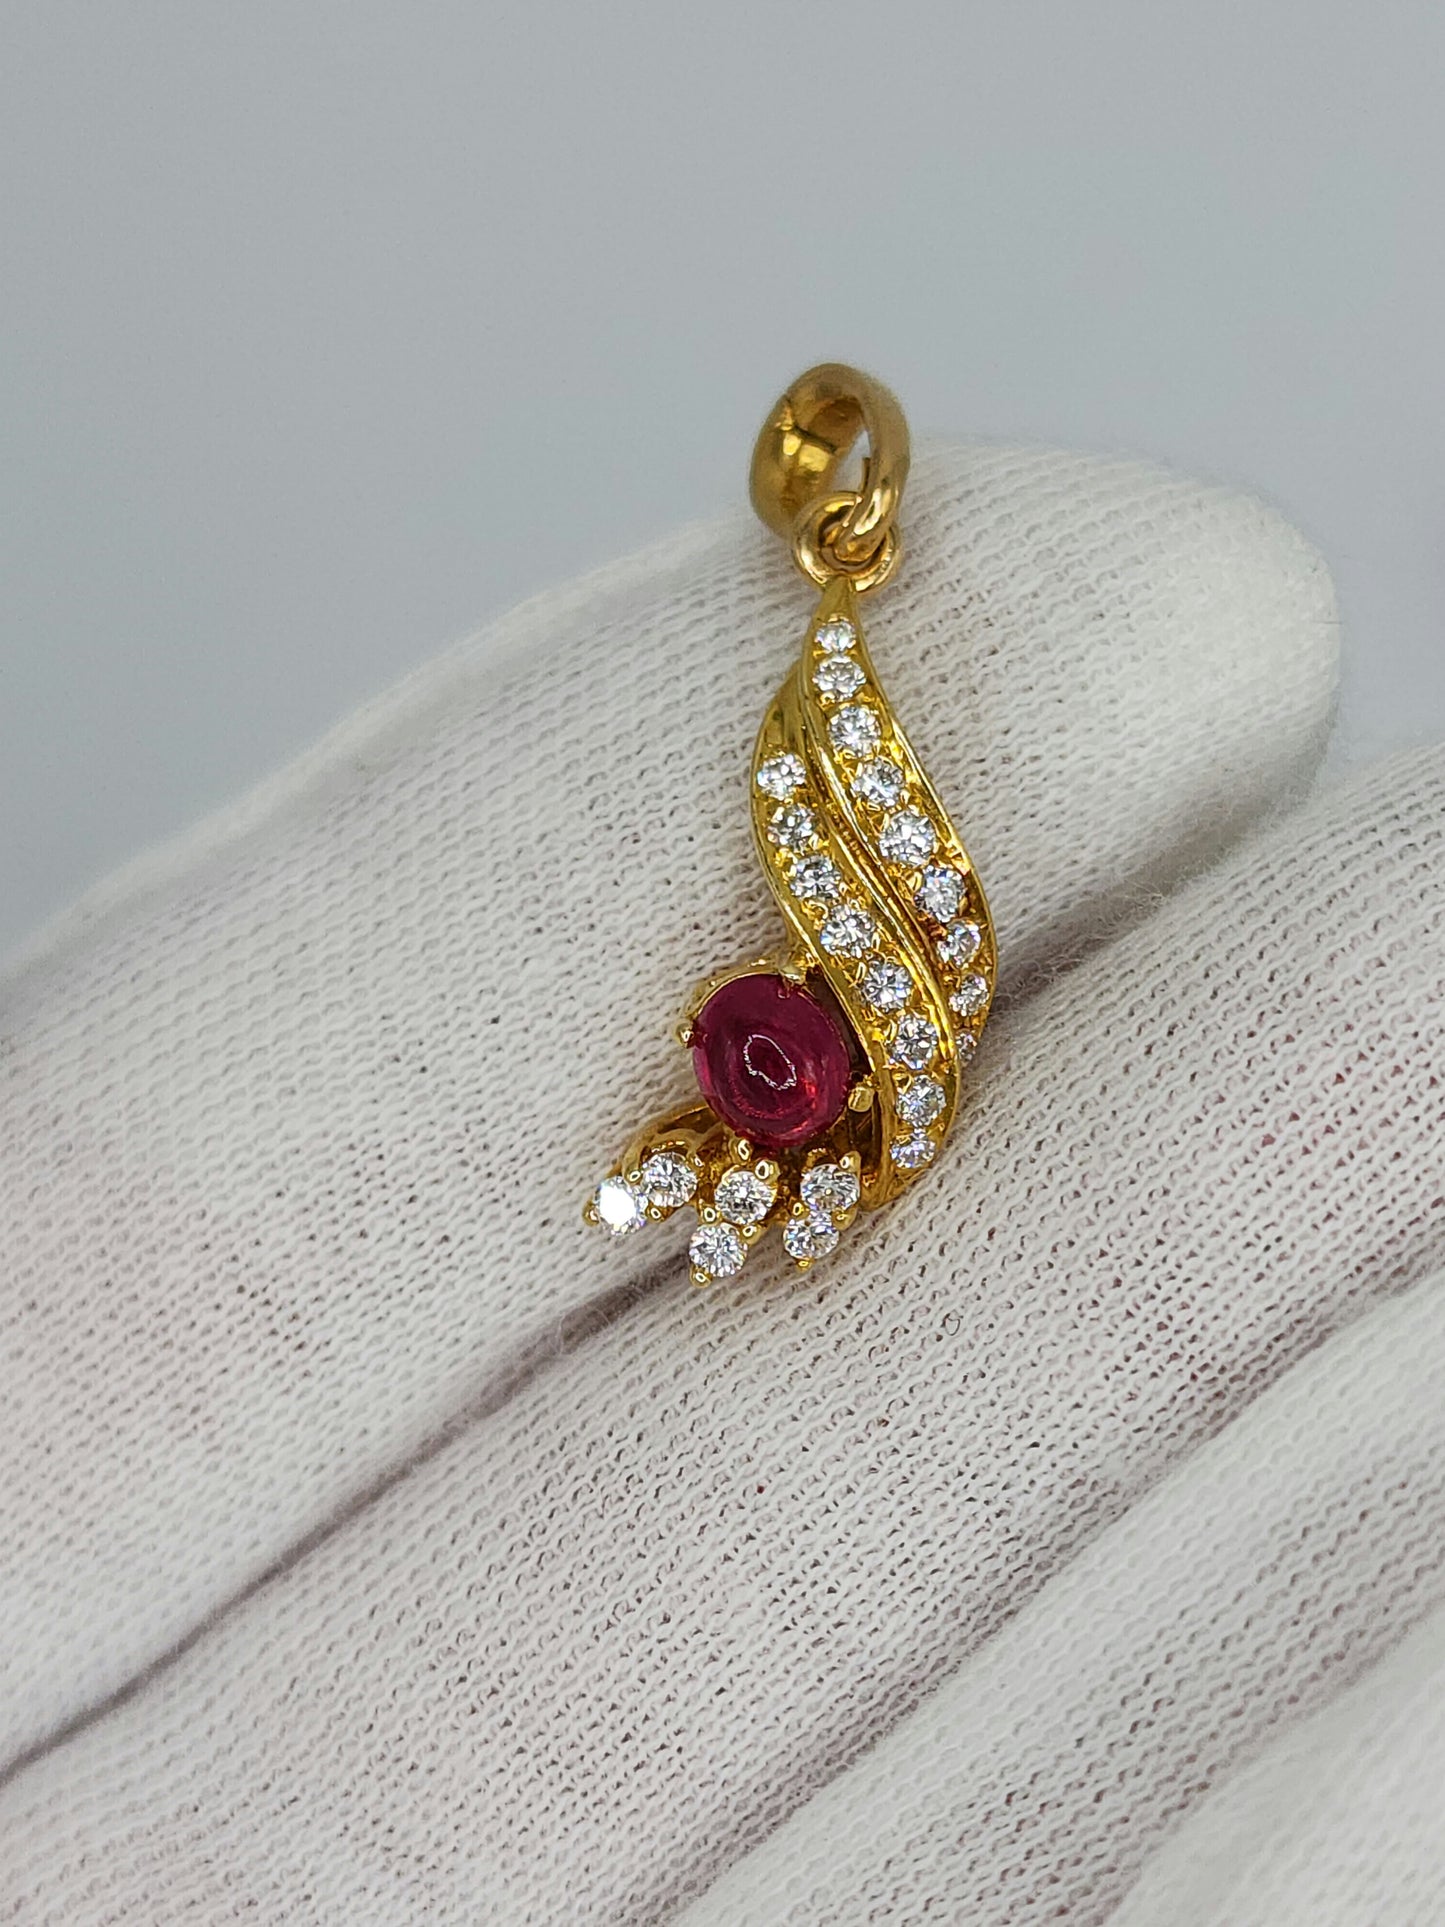 Cabochon Cut Ruby and Diamonds Free Form Pendant In 18k Yellow Gold